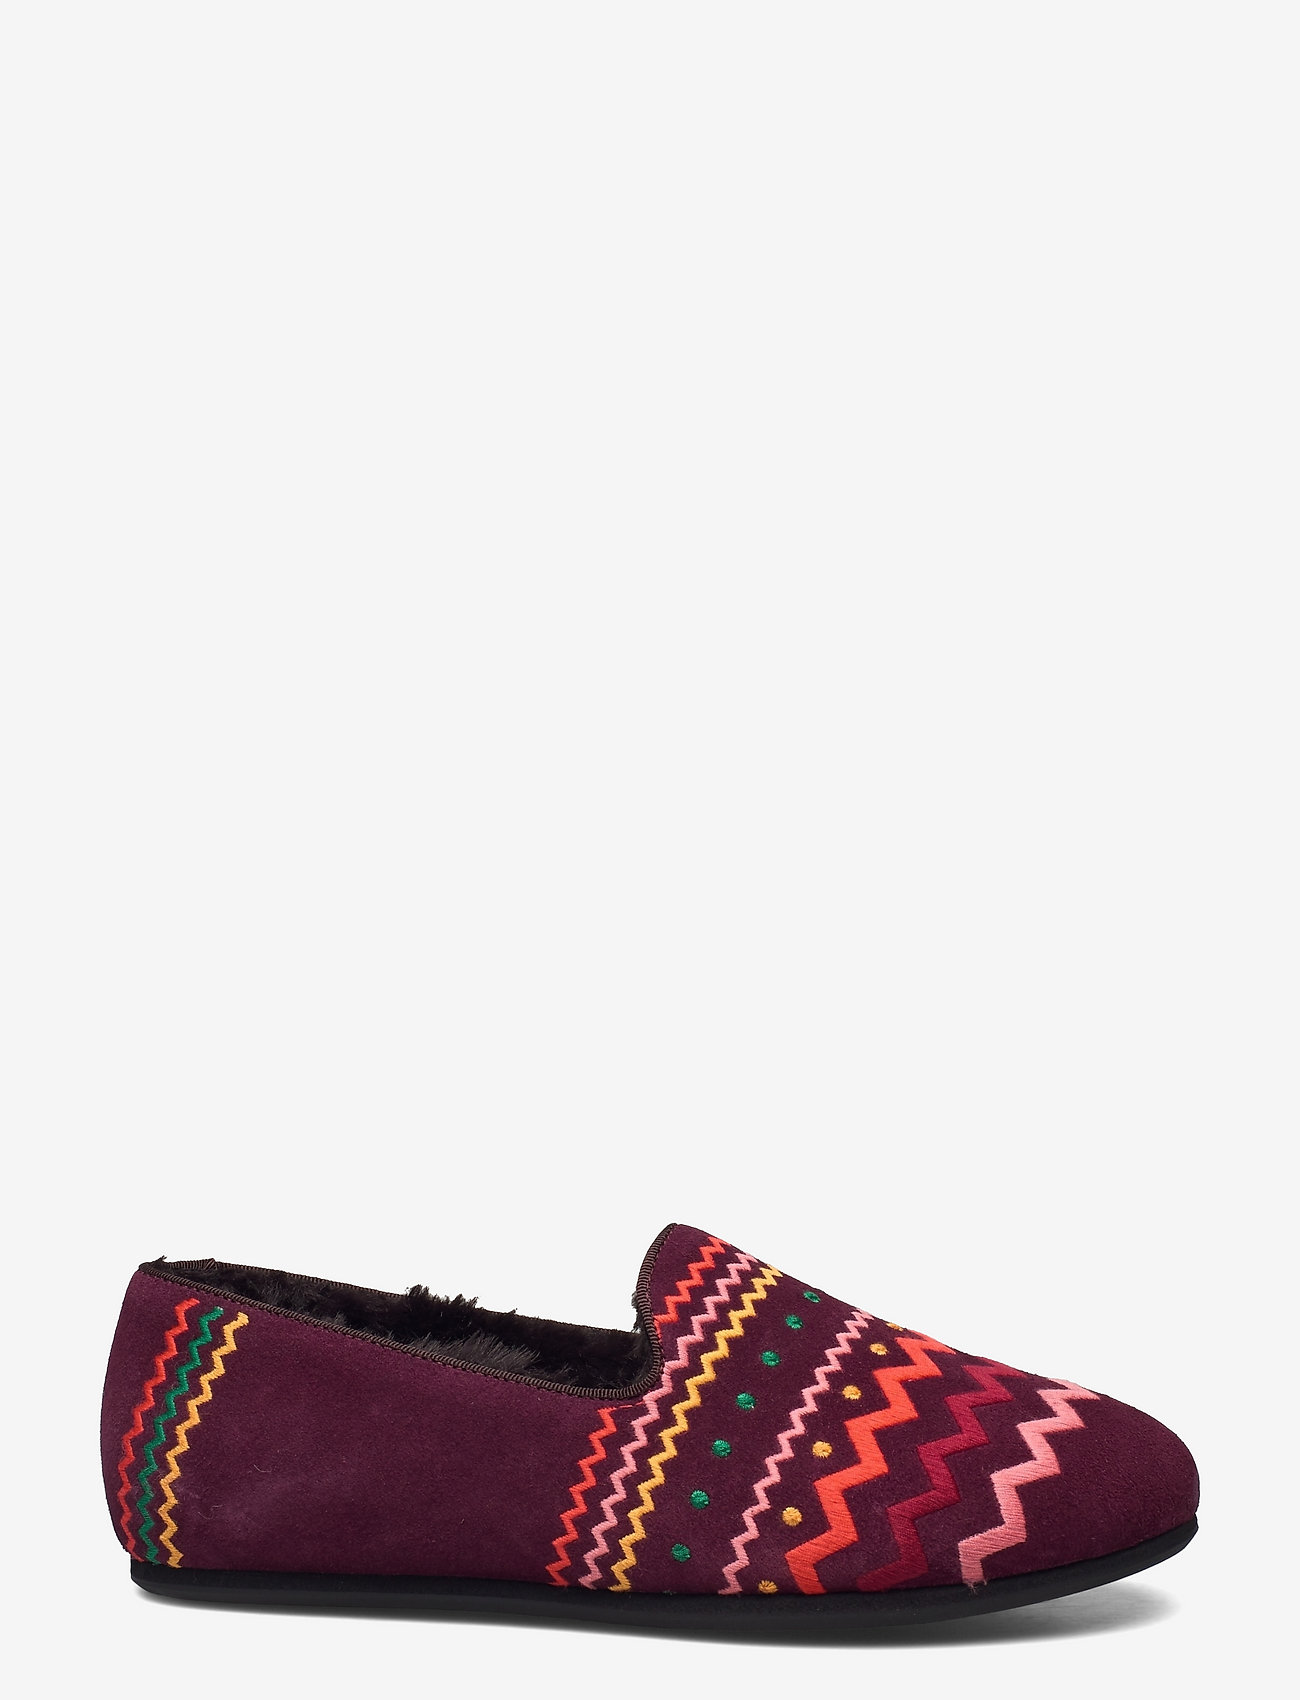 Hums - Hums color zigzag loafer - birthday gifts - red - 1